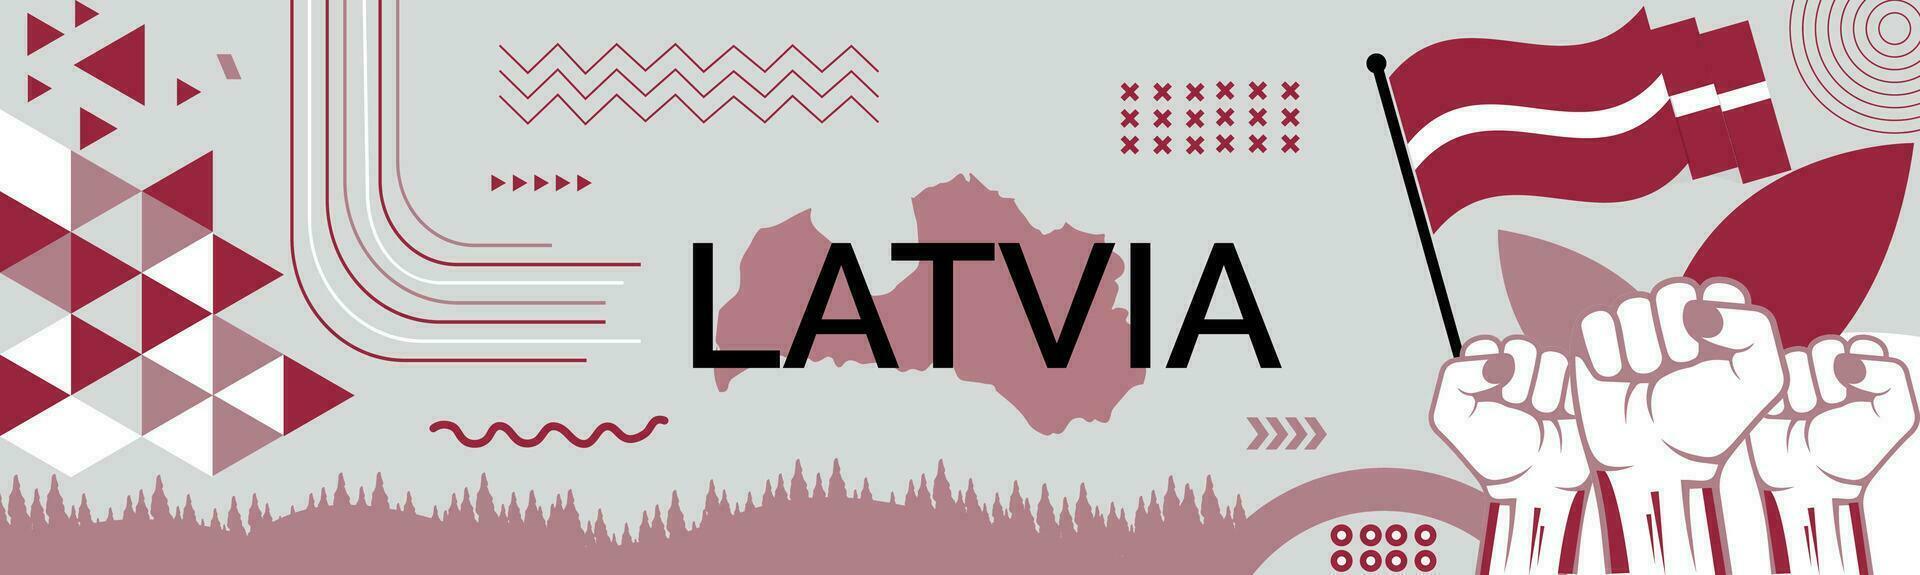 Latvia national day banner with map, flag colors theme background and geometric abstract retro modern colorfull design with raised hands or fists. vector